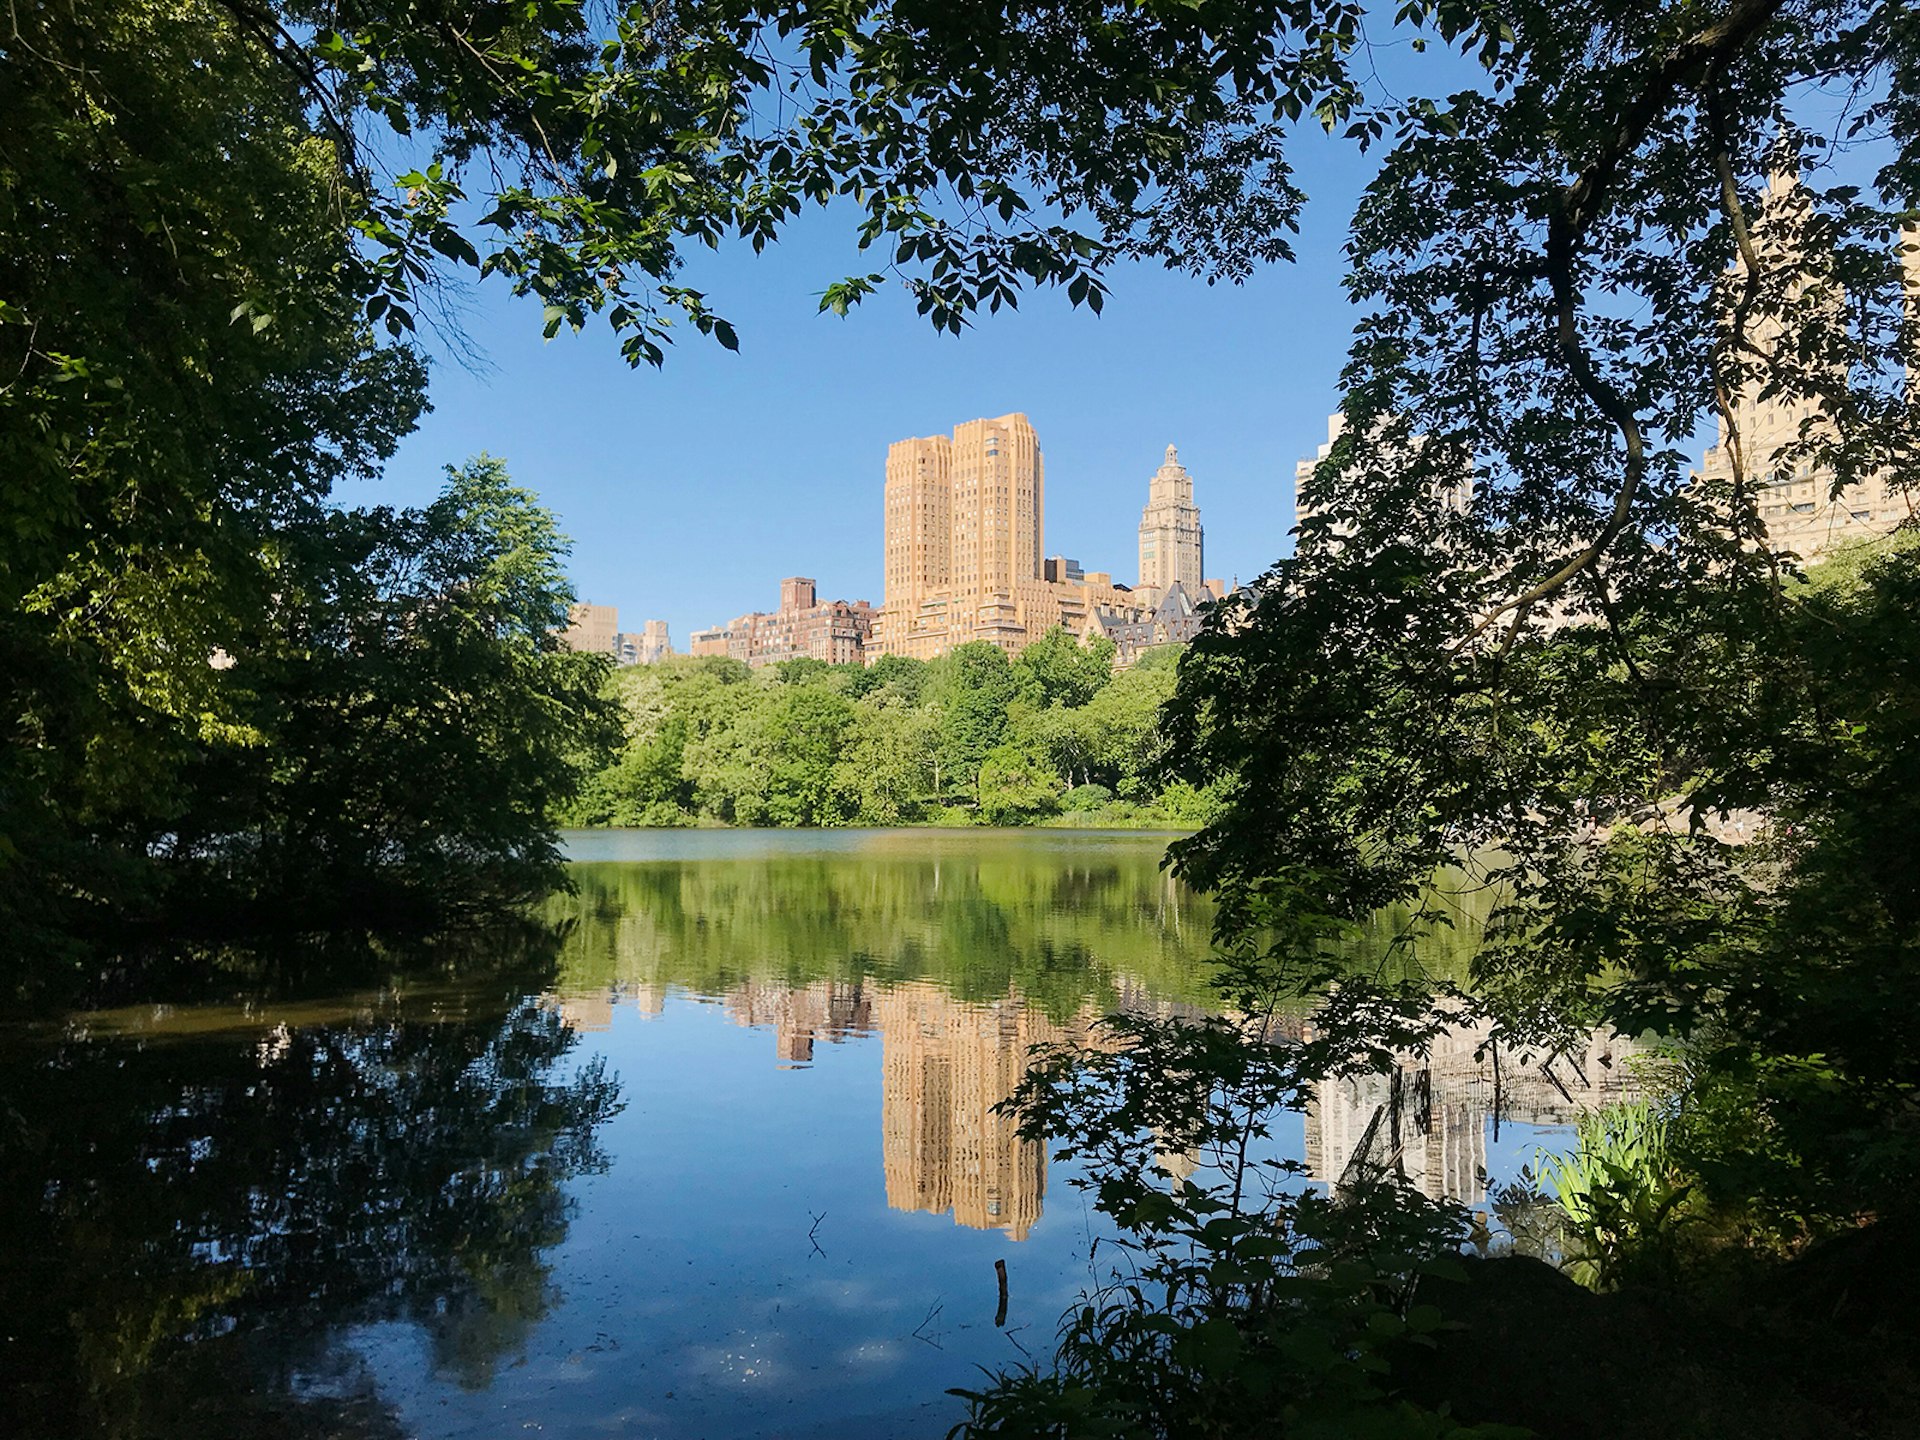 A glimpse of the Upper West Side of NYC from the far side of Central Park Lake, with trees framing the buildings and a blue sky. © Mikki Brammer / Lonely Planet 